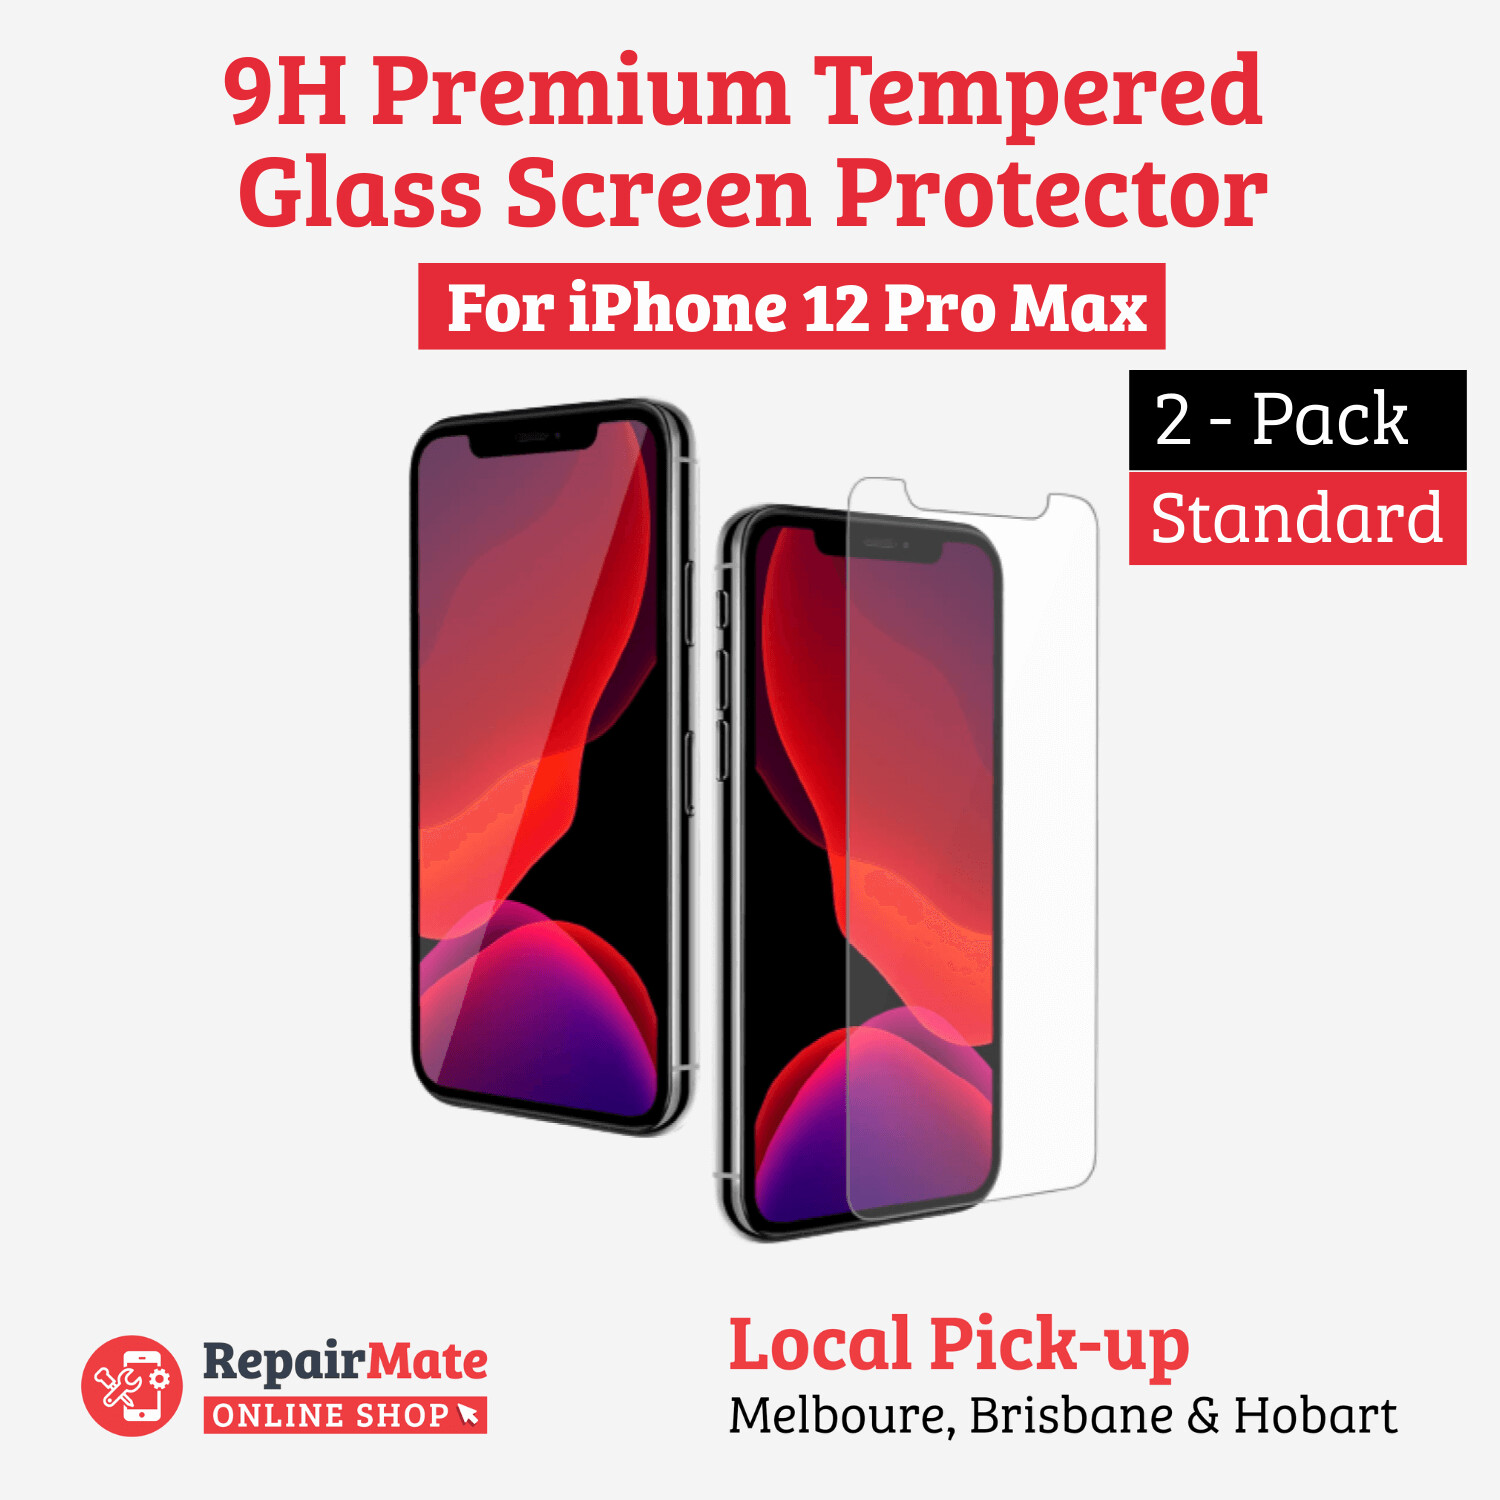 iPhone 12 Pro Max 9H Premium Tempered Glass Screen Protector [2 Pack]